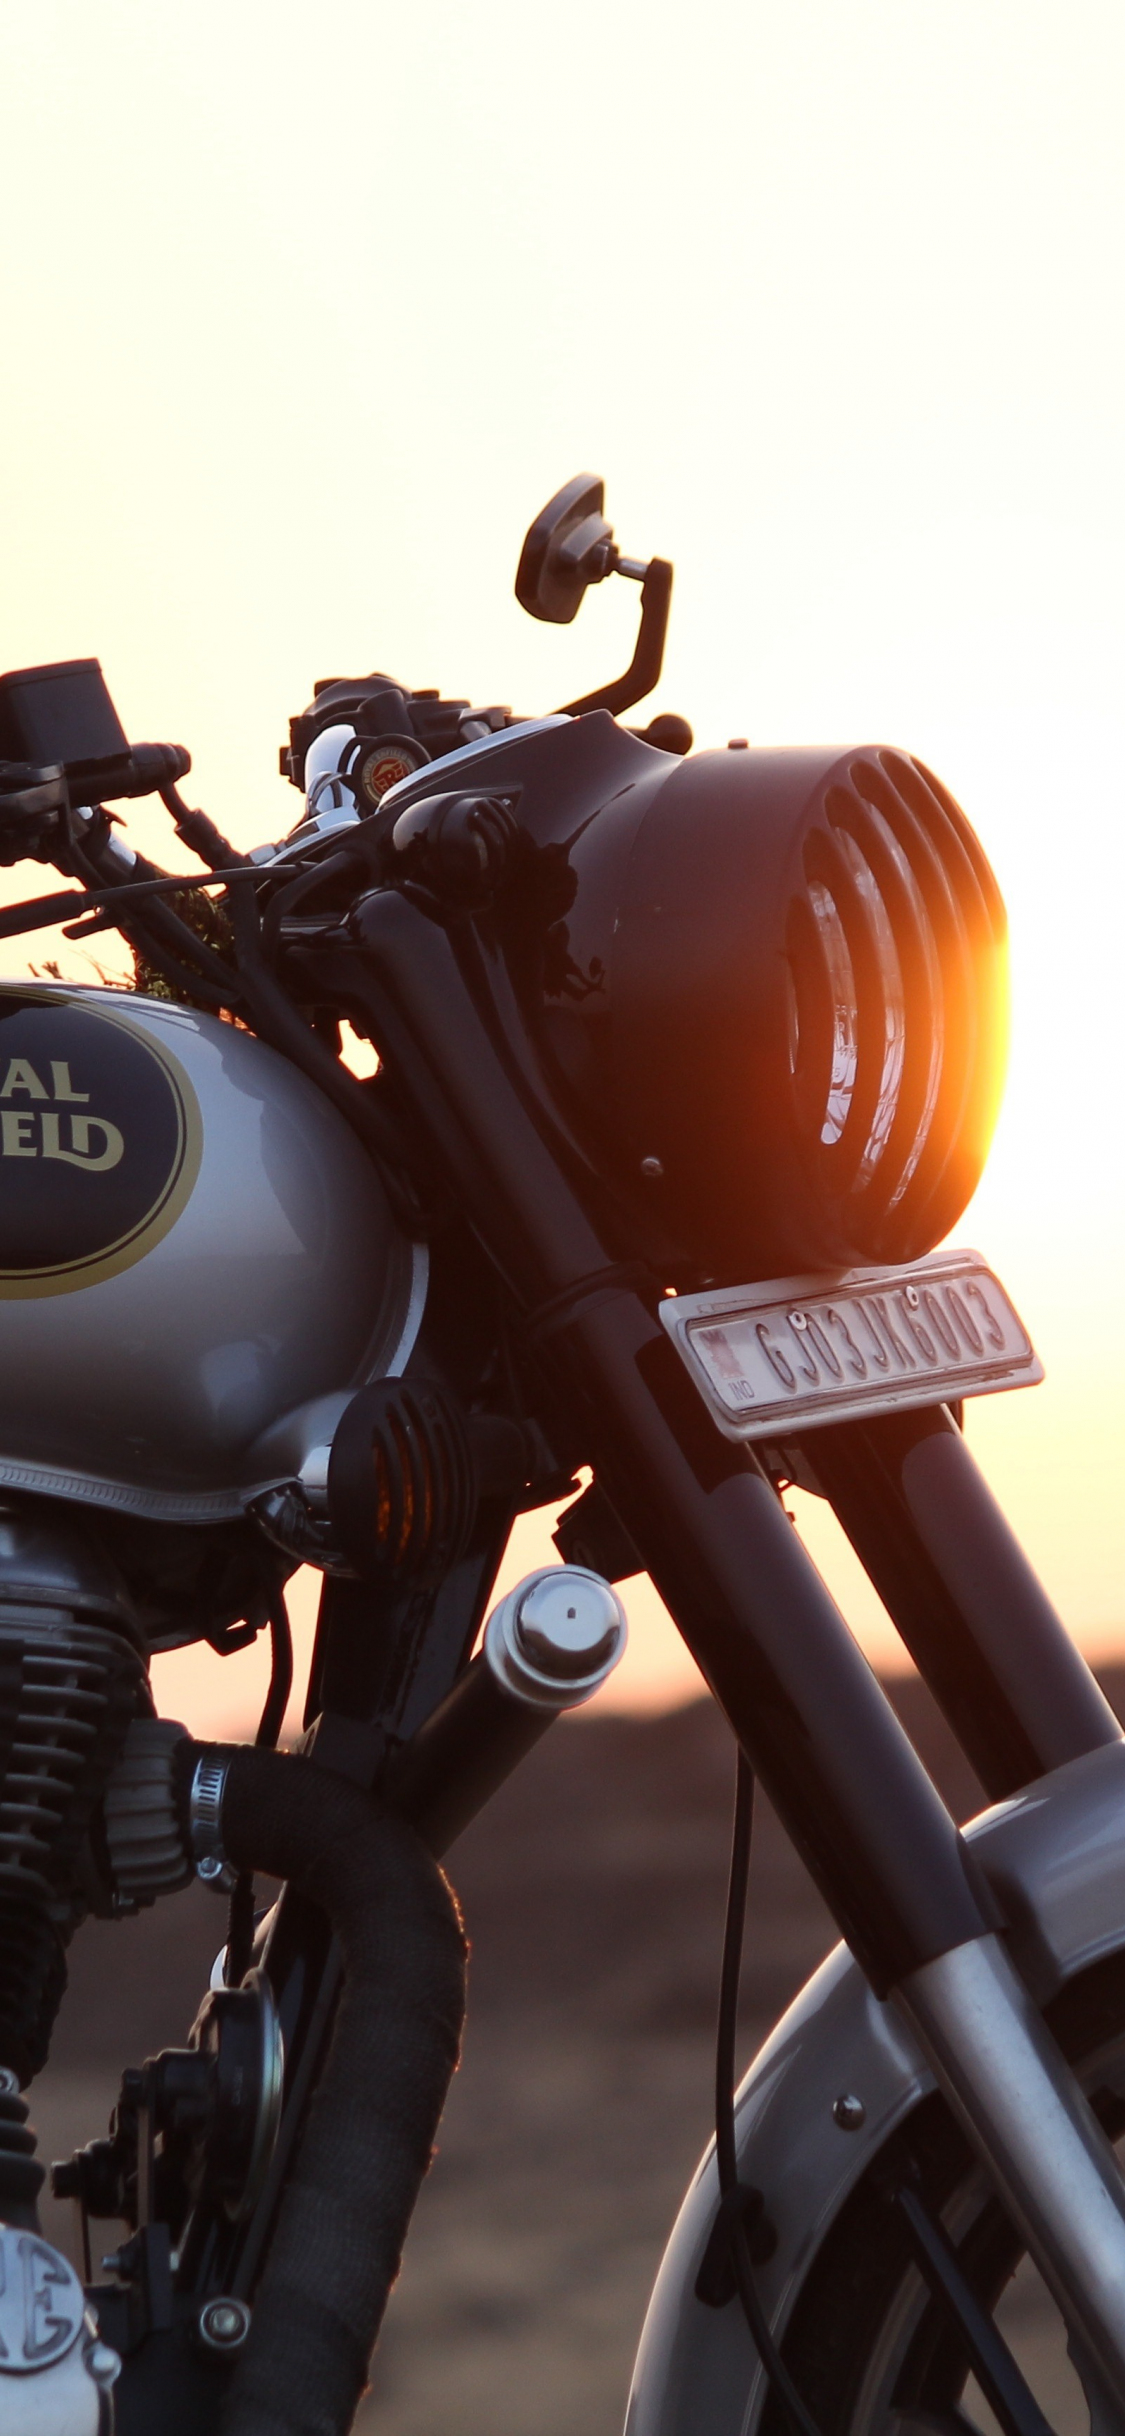 Download wallpaper 1125x2436 royal enfield, motorcycle, iphone x, 1125x2436  hd background, 1034